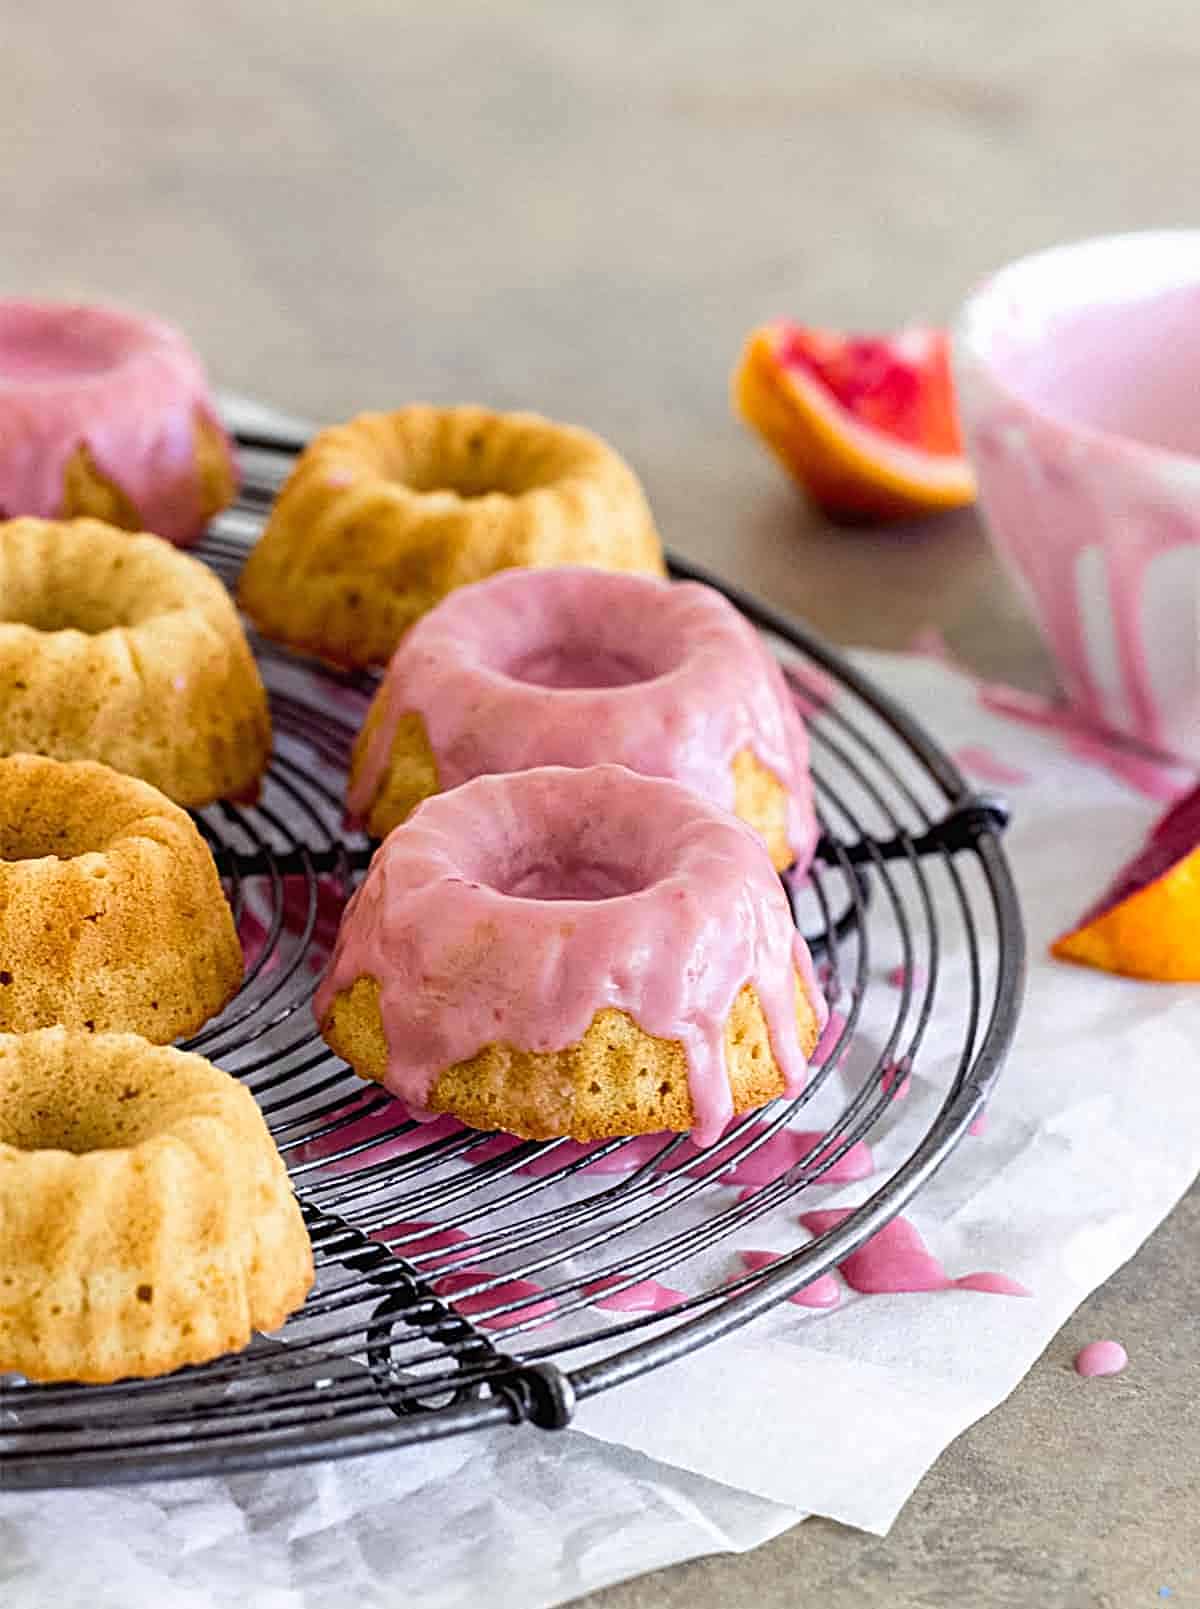 Pink Glazed mini bundt cakes on wire rack, grey surface, bowl and orange wedges on the side